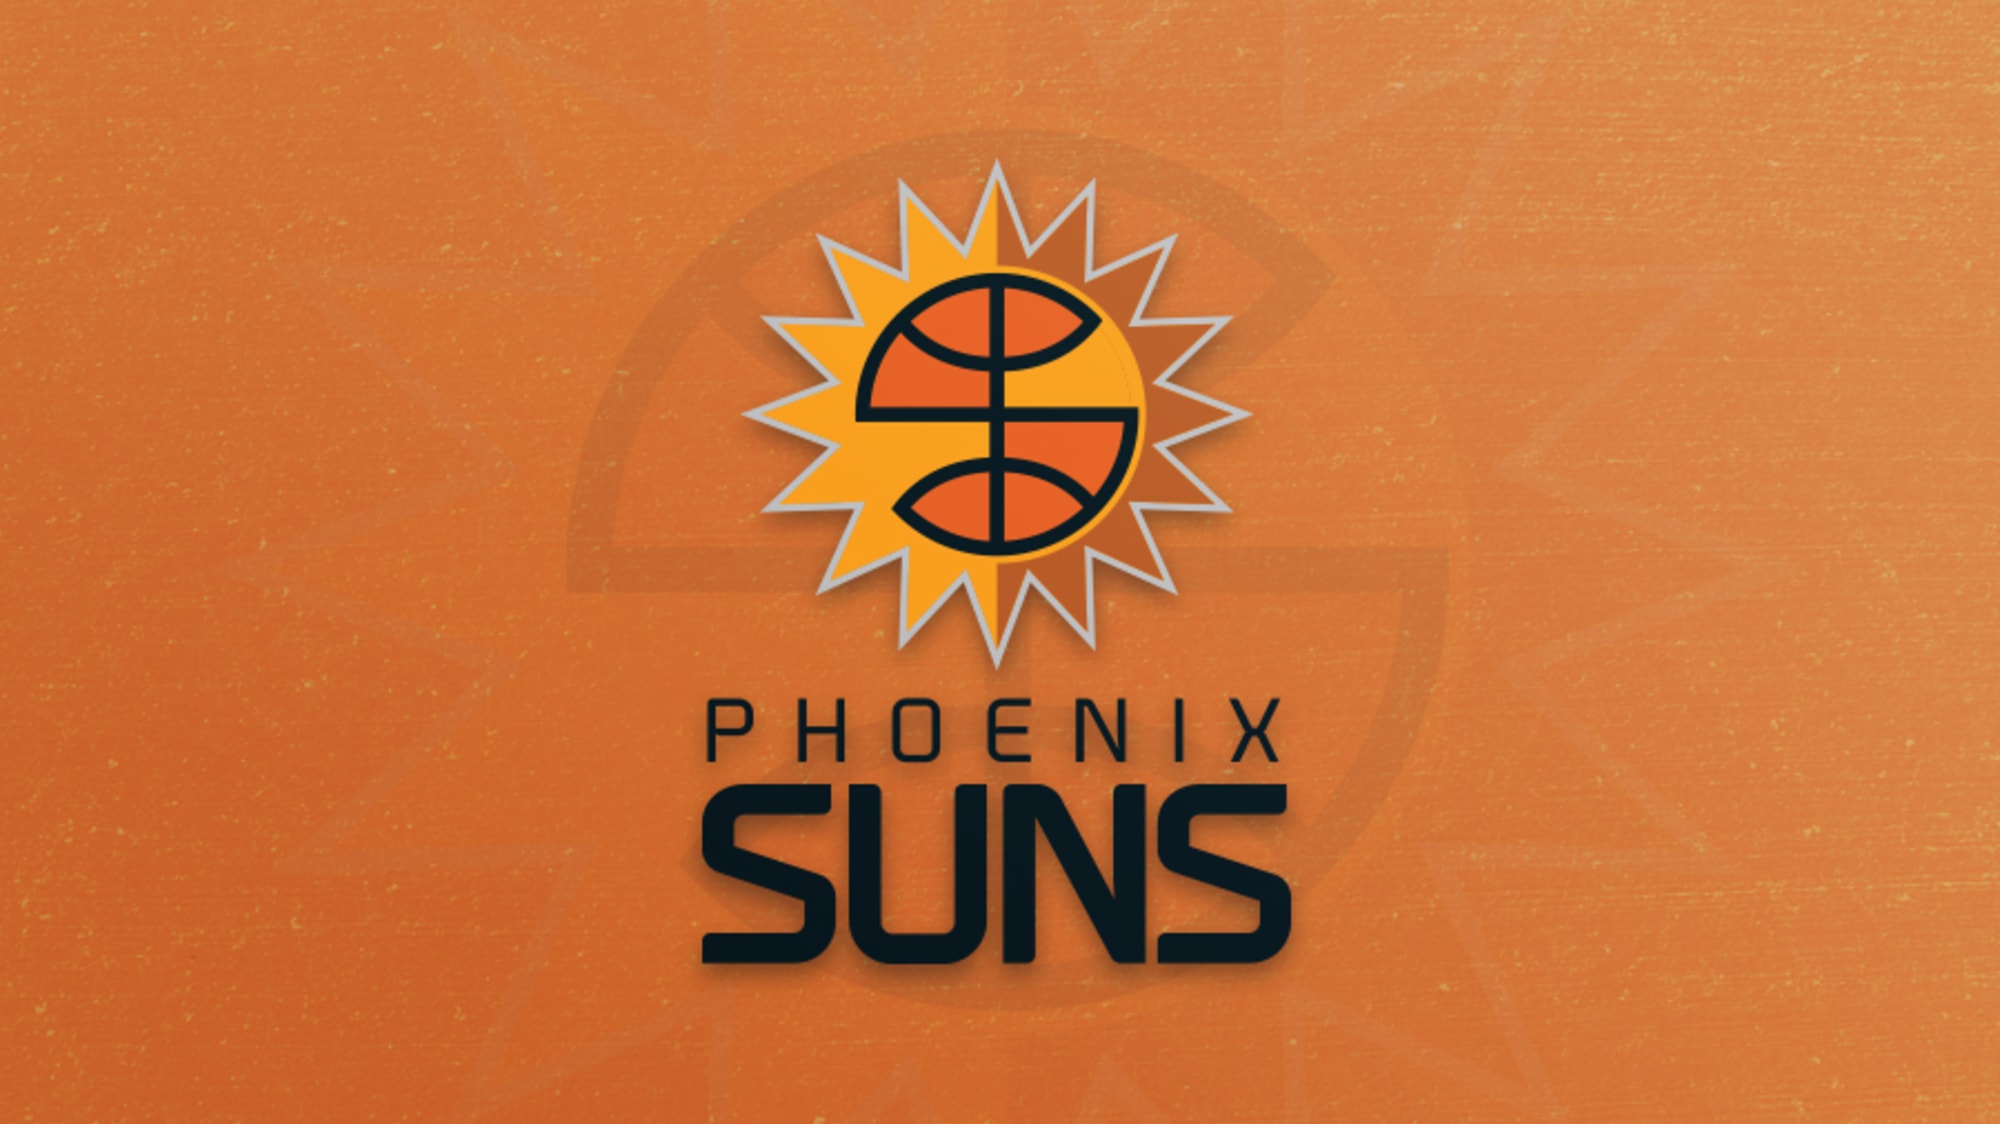 last time suns were in western conference finals